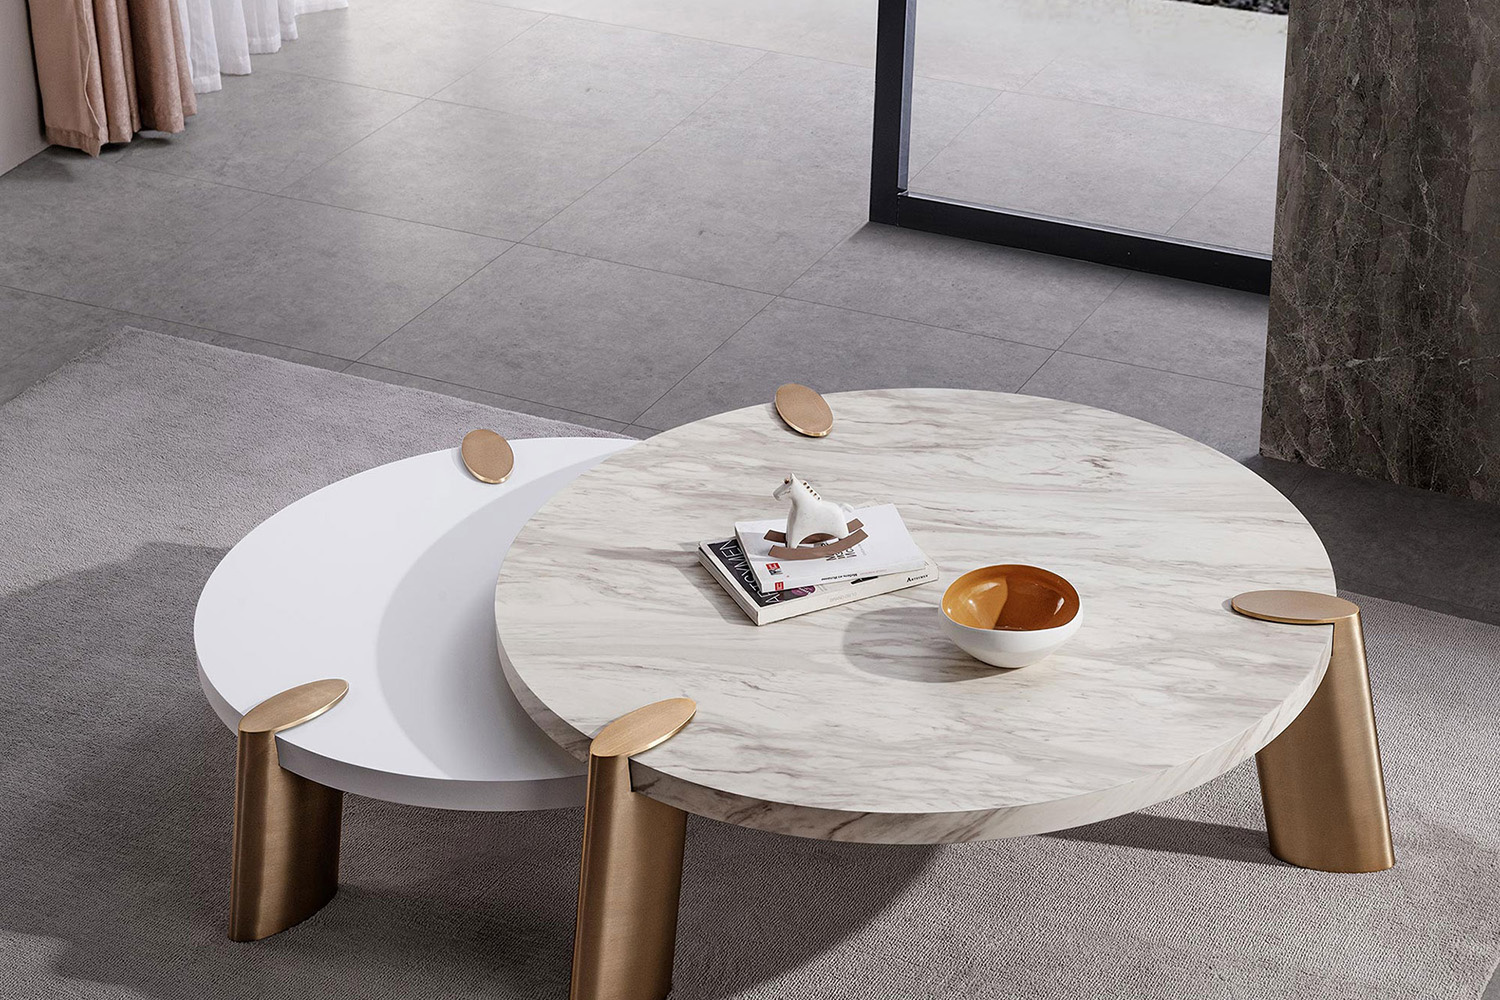 Mimeo Coffee Table is about comfortable use, modernity and decoration of your design